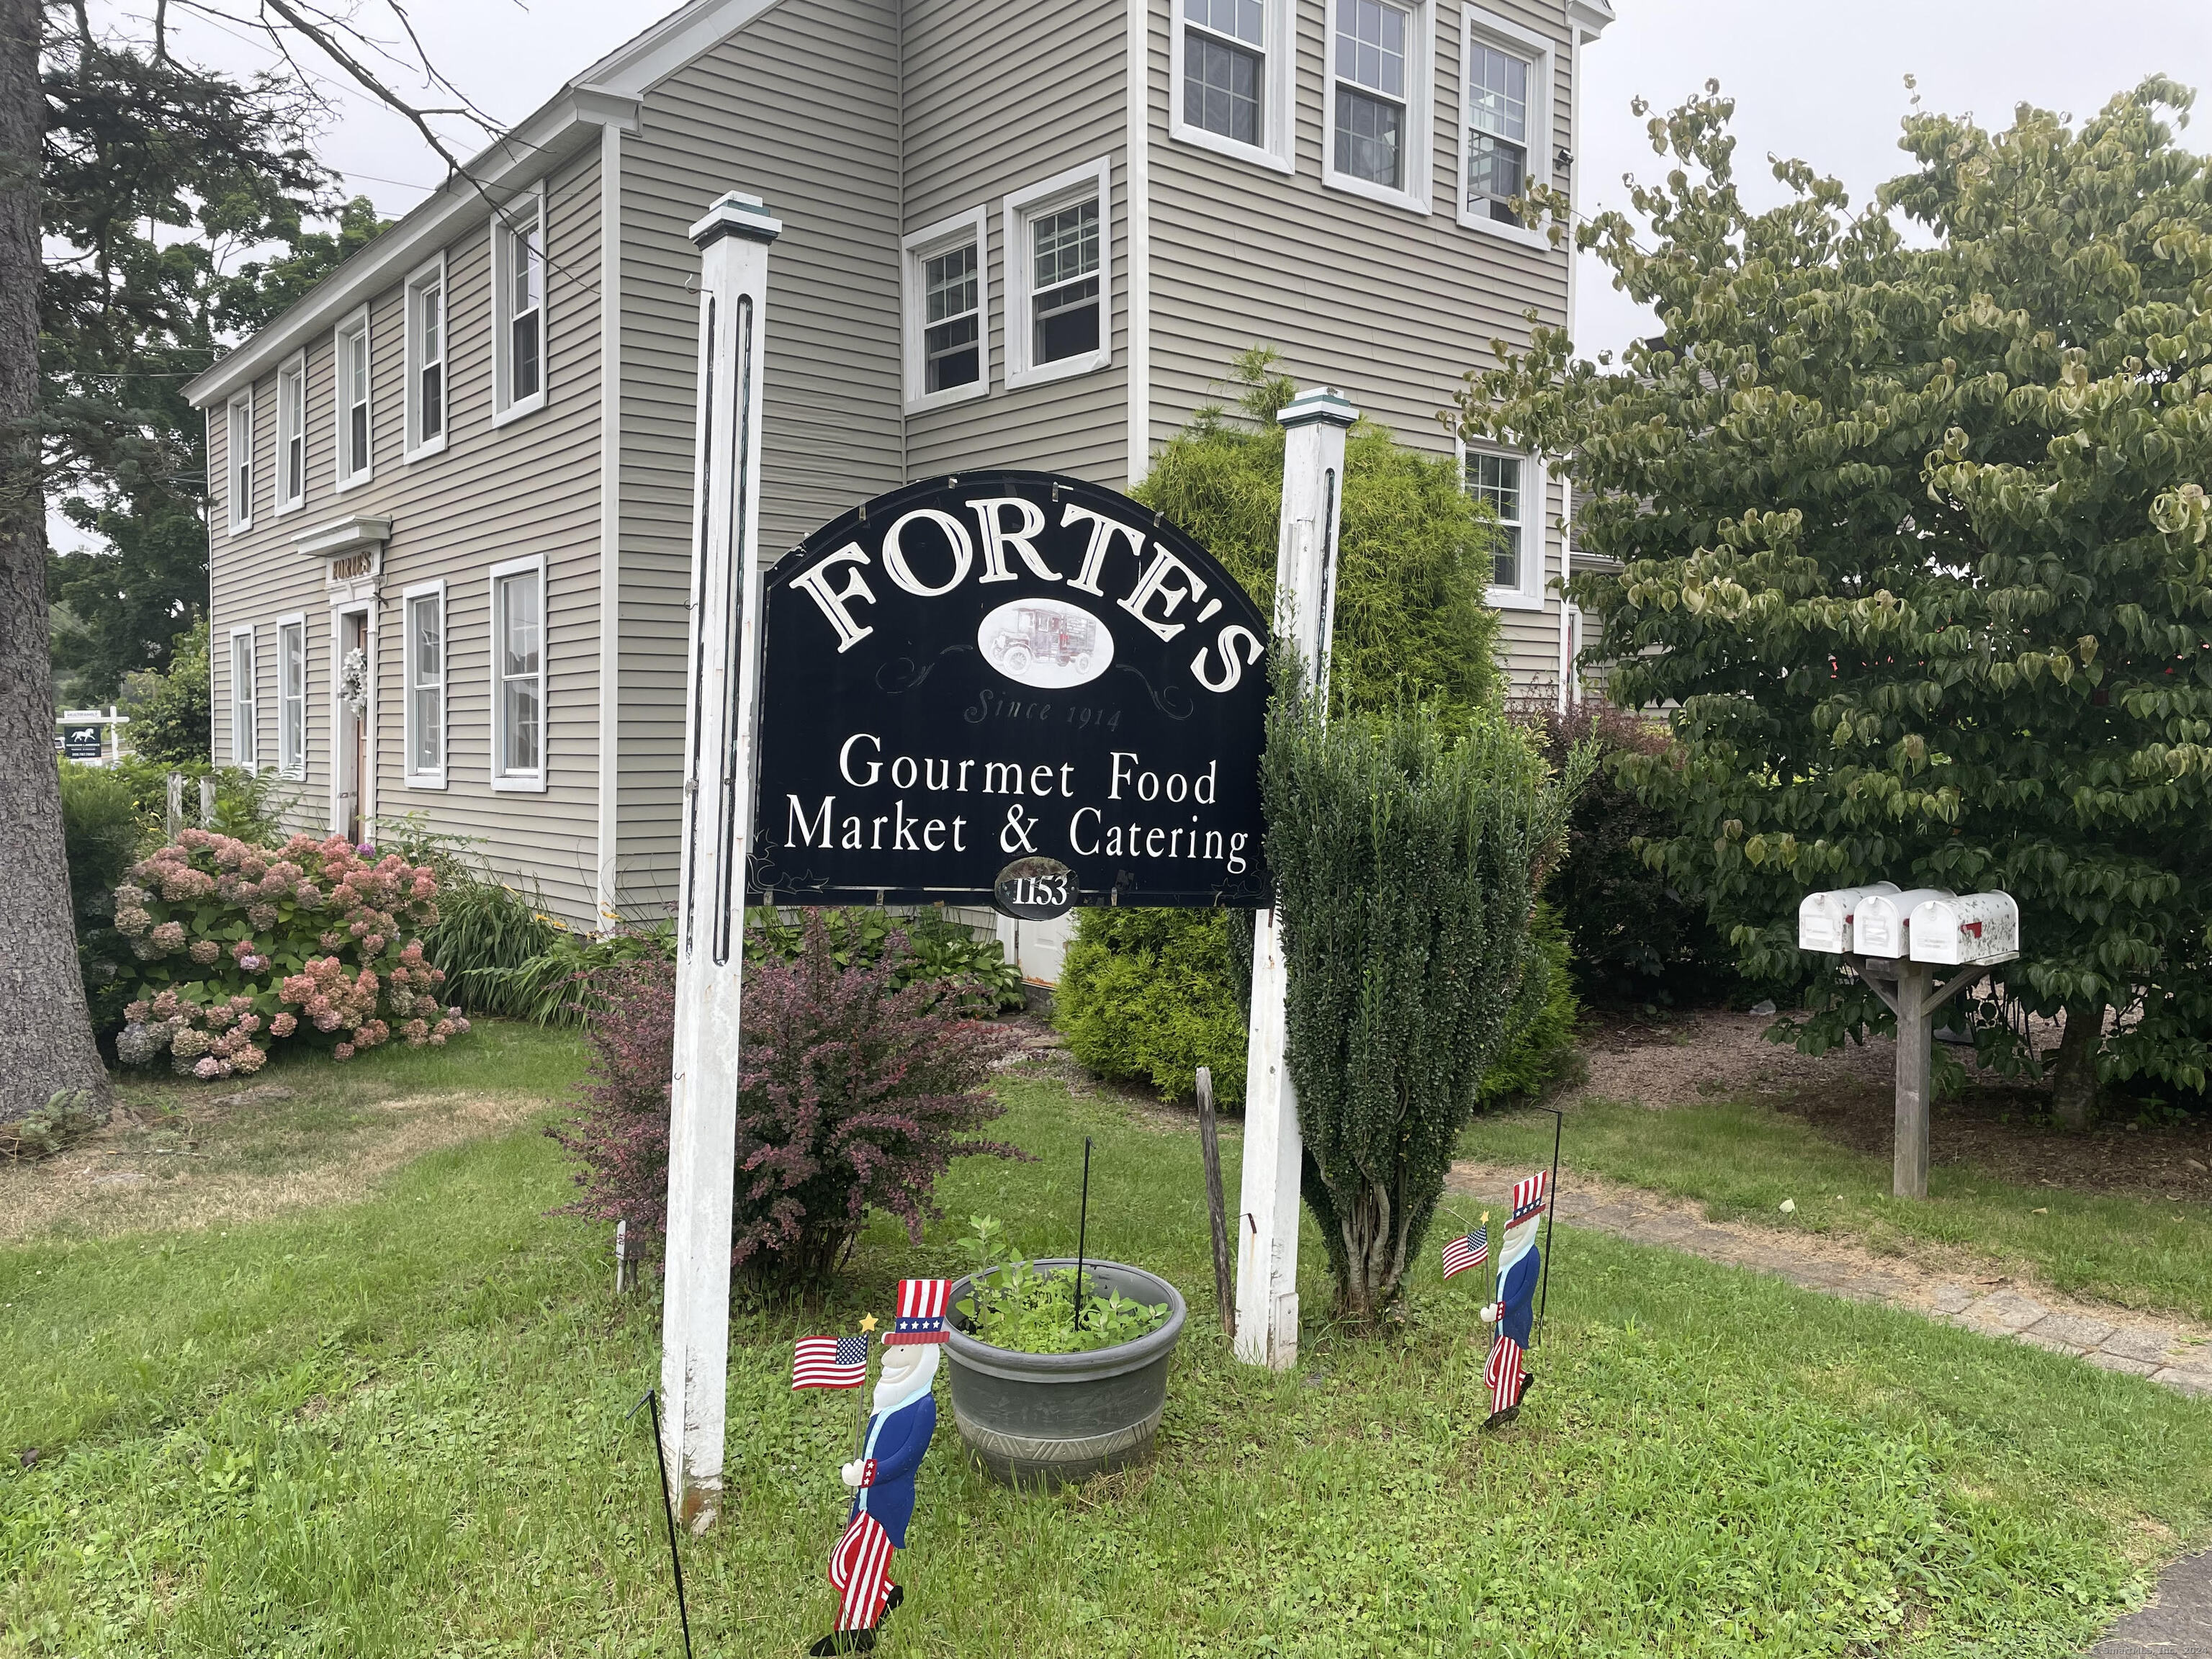 Rental Property at 1153 Boston Post Road 3rd Floor, Guilford, Connecticut - Bathrooms: 1 
Rooms: 1  - $1,000 MO.